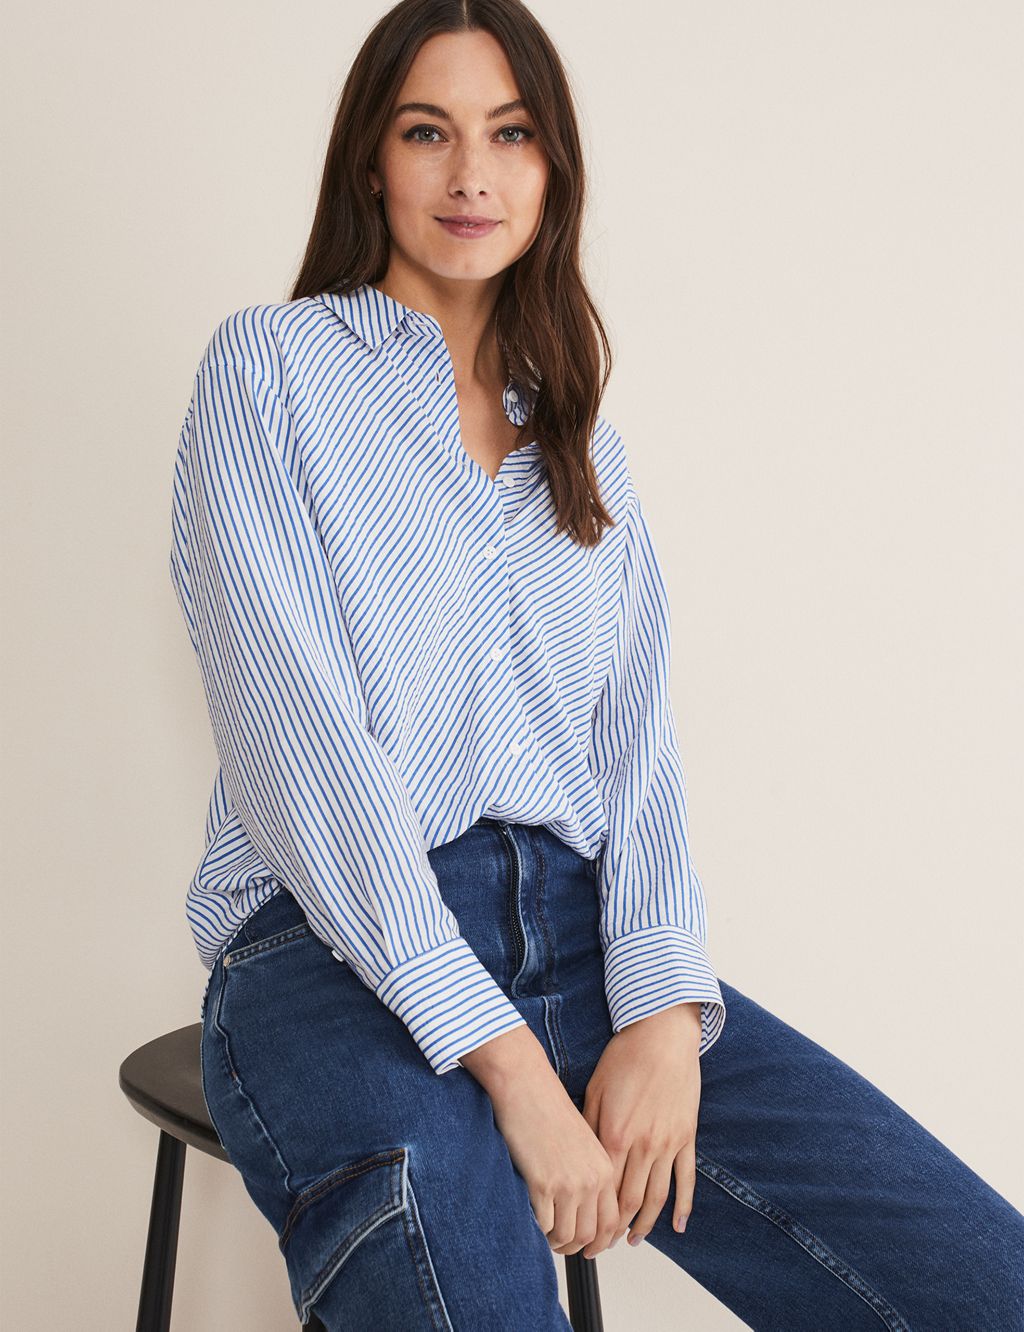 Striped Collared Shirt image 5